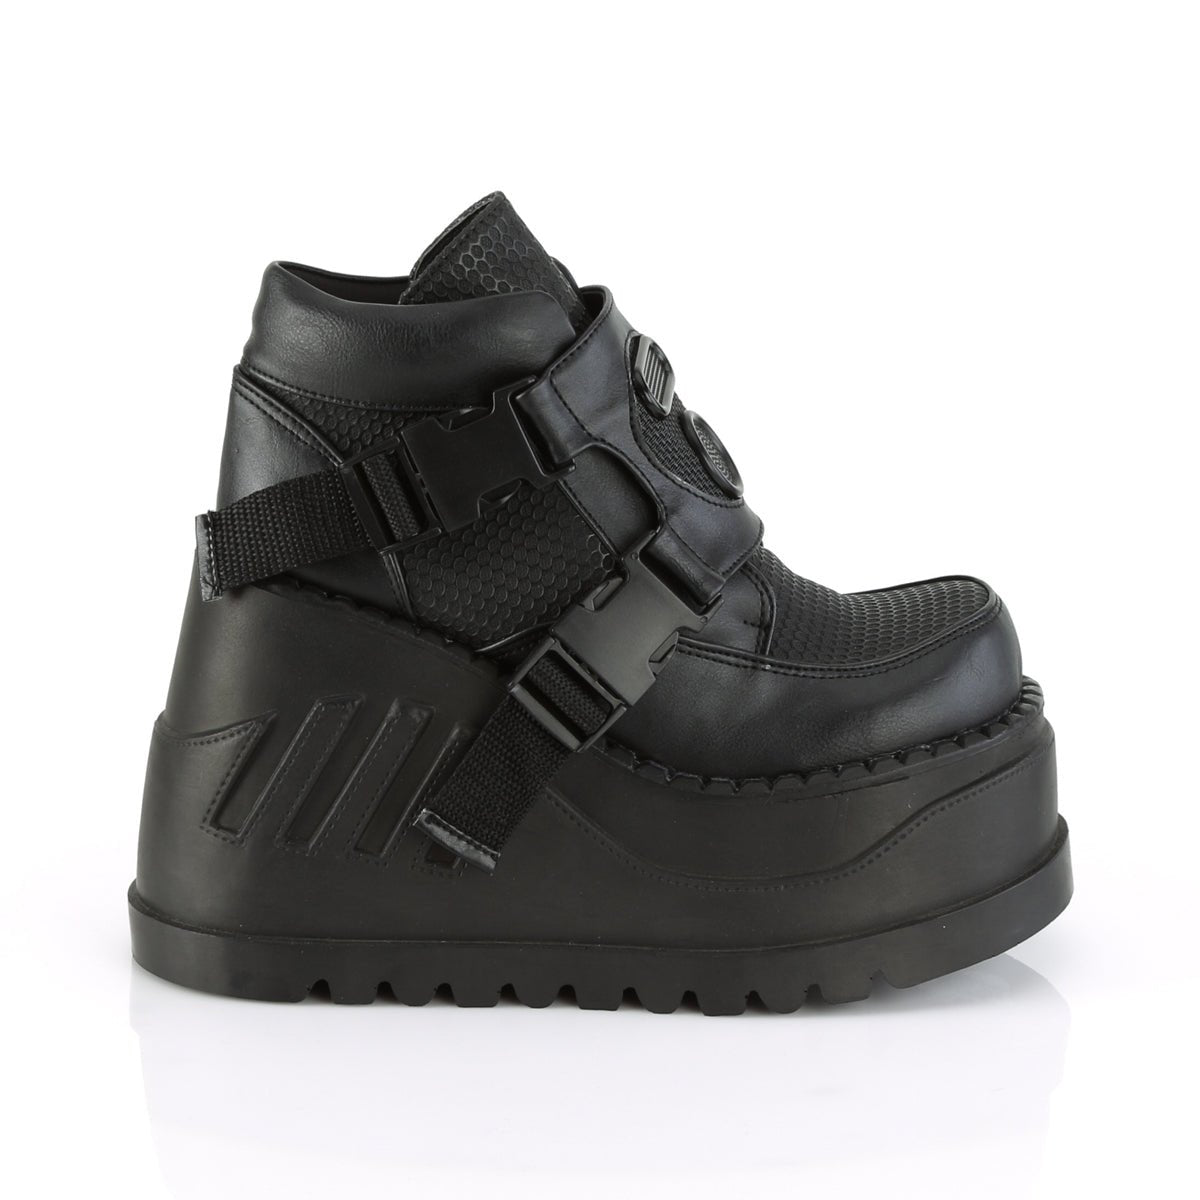 Too Fast | Demonia Stomp 15 | Black Vegan Leather Women's Ankle Boots